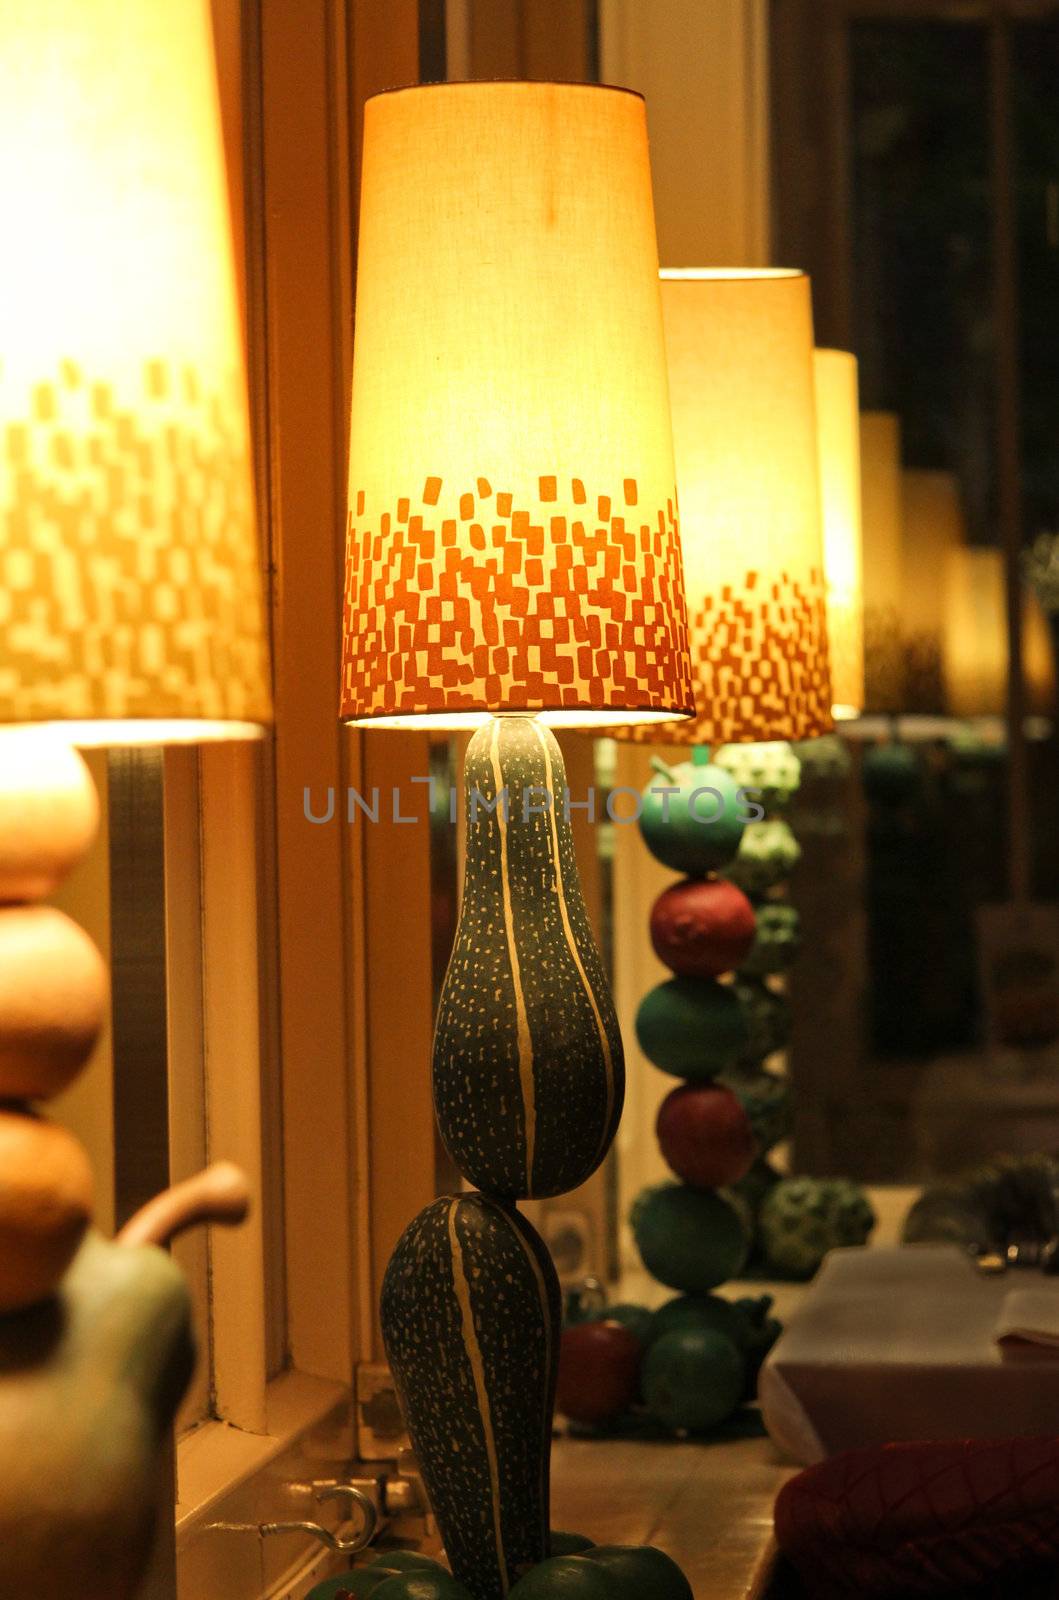 Artistic lamps built with fruit and vegetables forms